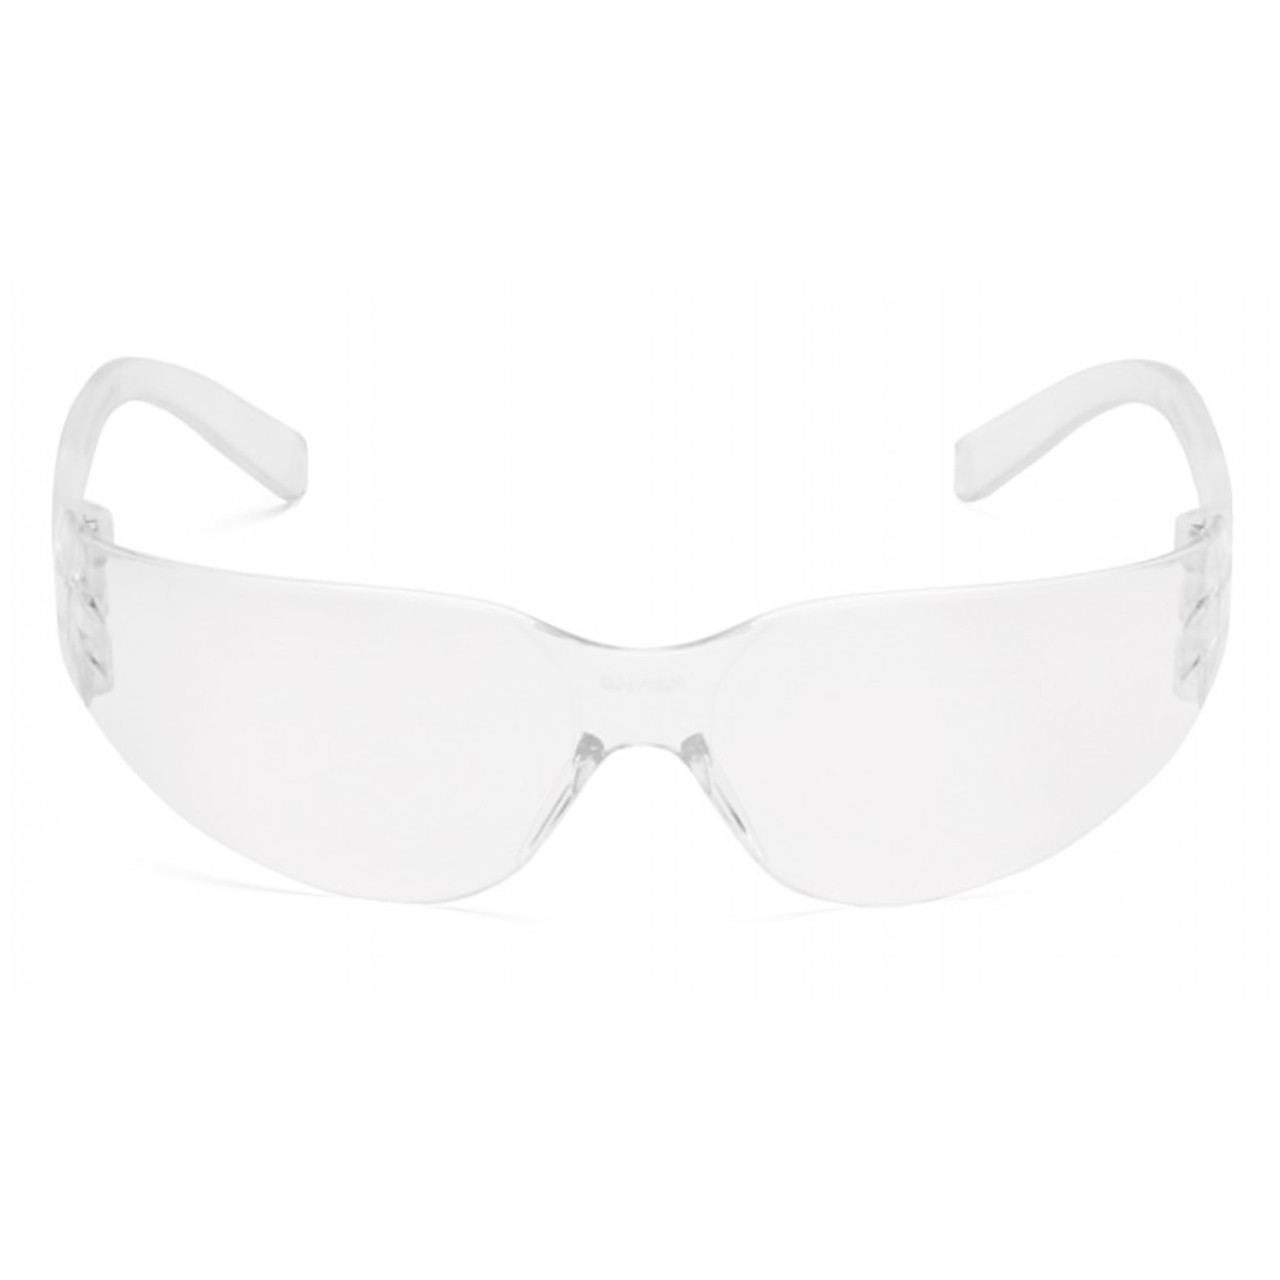 Pyramex, Intruder Series, Safety Glasses with Hardcoated Anti-fog Lens